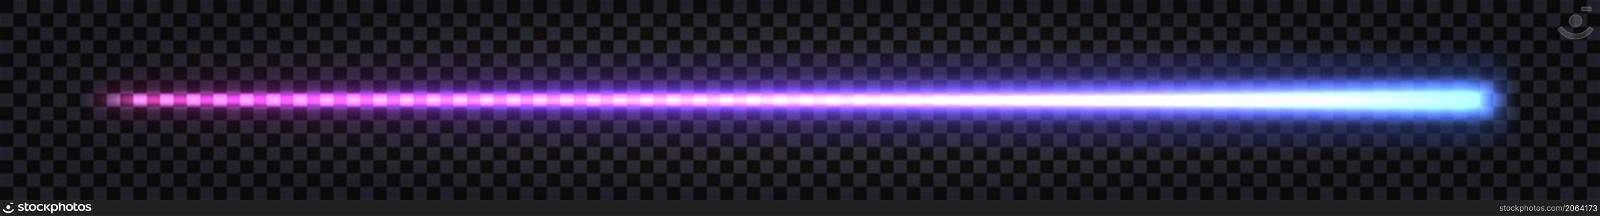 Glowing laser beam, neon stick with light thunder bolt effect. Purple to blue gradient, electric impulse dynamic line. Techno futuristic energy ray, isolated element. Vector illustration